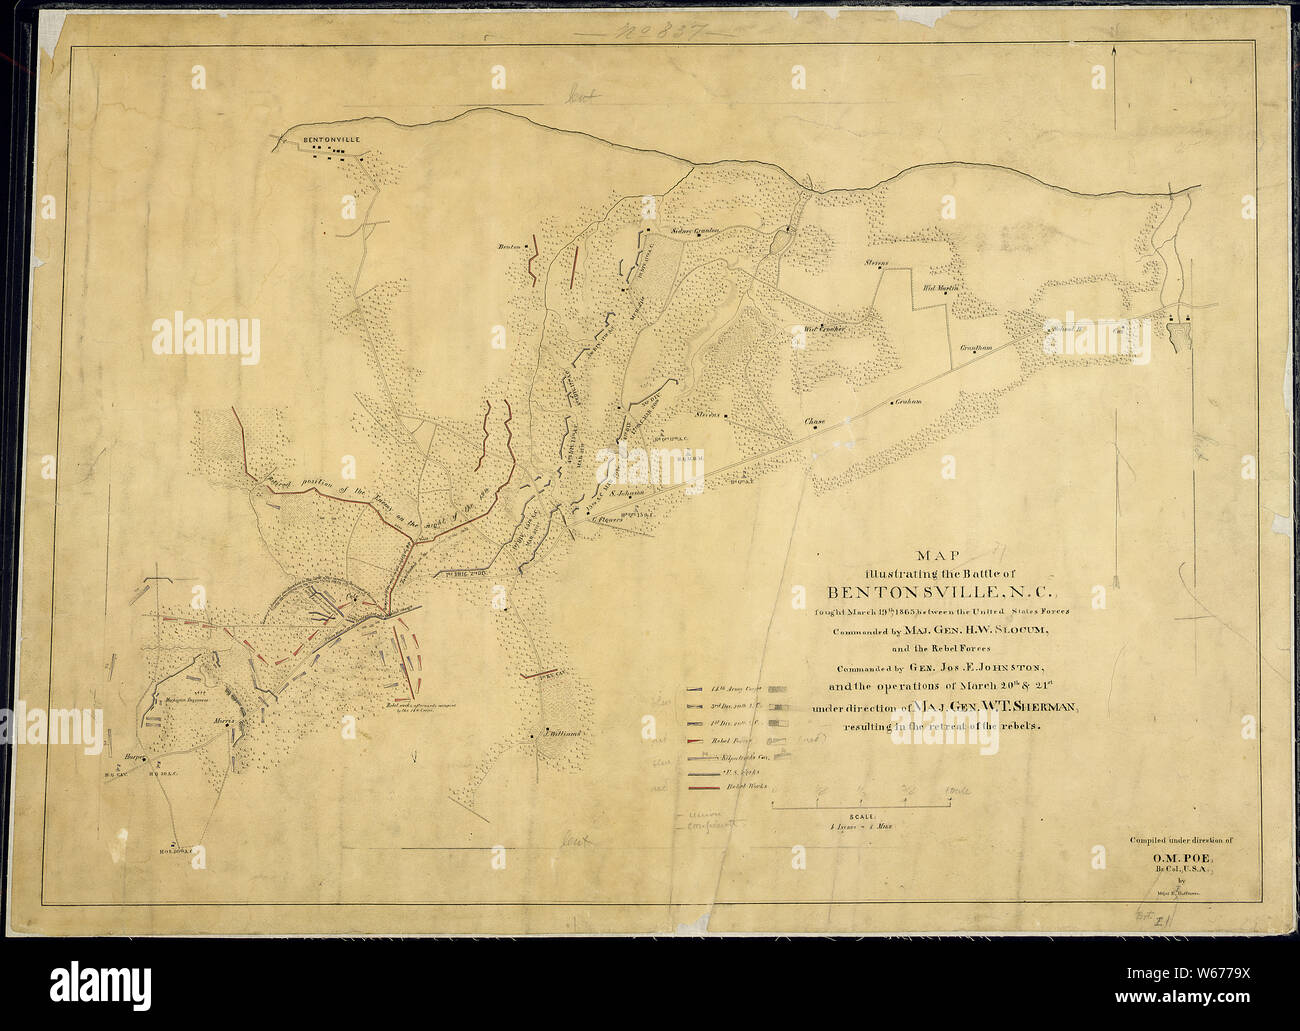 Map illustrating the Battle of Bentonsville, N.C., fought March 19th, 1865, between the United States Forces Commanded by Maj. Gen. H. W. Slocum and the Rebel Forces Commanded by Gen. Jos. E. Johnston, and the operations of March 20th & 21st under direction of Maj. Gen. W. T. Sherman resulting in the retreat of the rebels. Compiled under direction of O. M. Poe, Br. [Bvt.] Col., U.S.A., by Major E. [F.] Hoffmann. Stock Photo